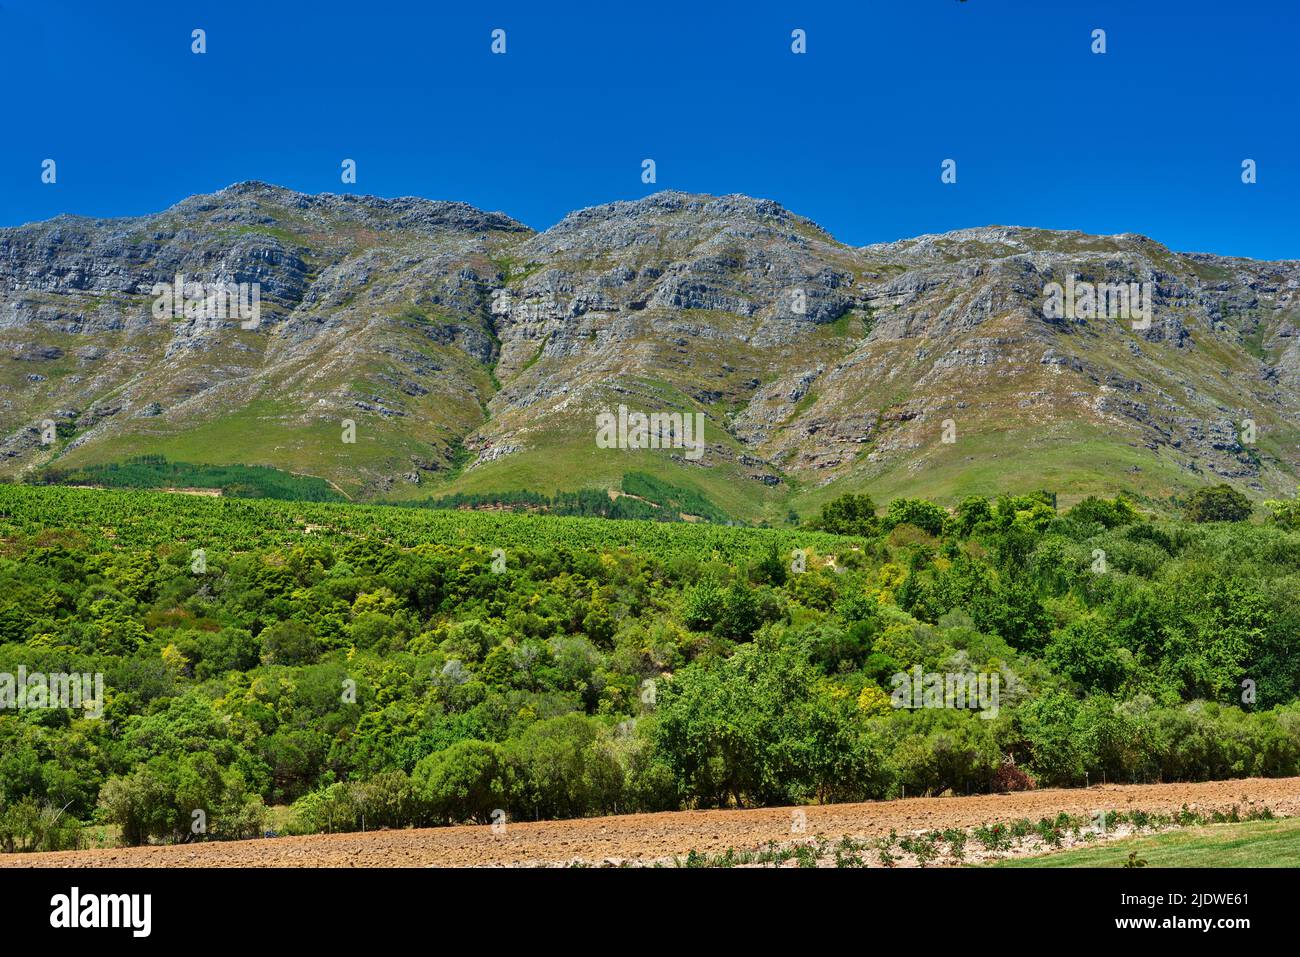 Mountain range with lush greenery near tilled farmland in the vineyards of Stellenbosch, South Africa. Vibrant green nature scene of bushes with a Stock Photo